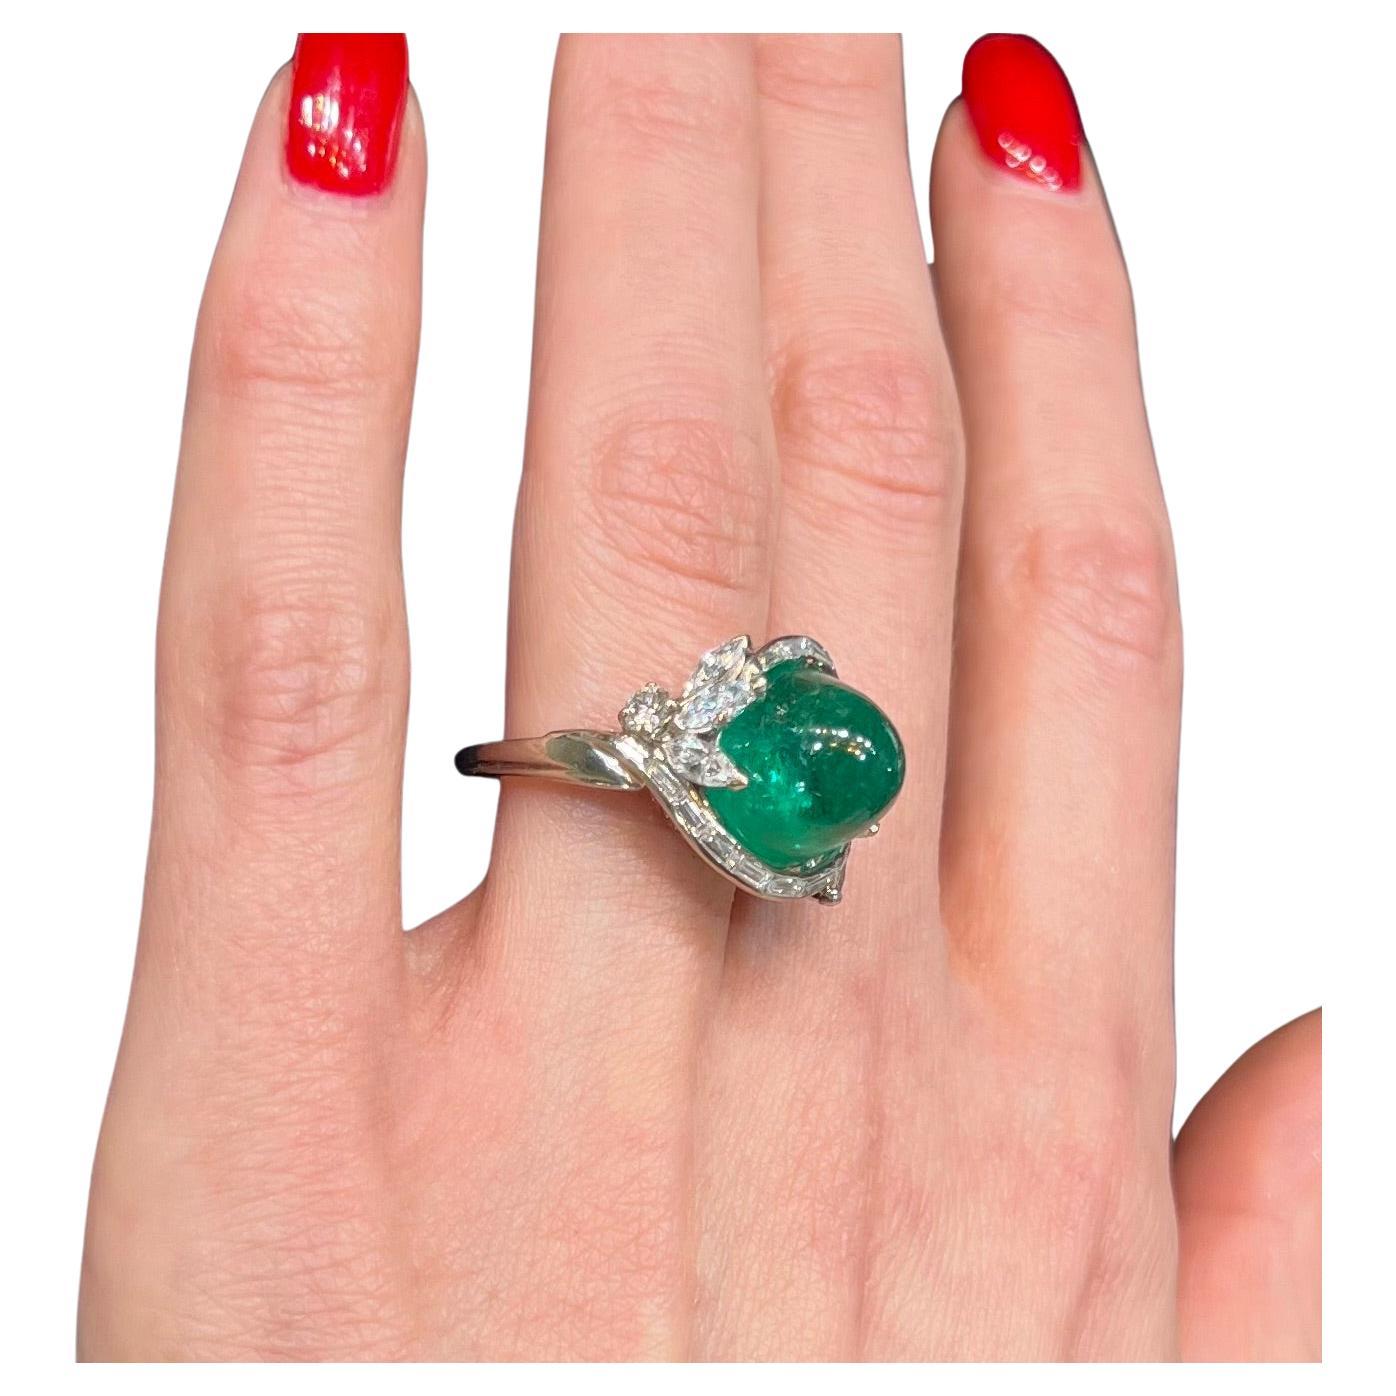 Introducing the epitome of luxury and elegance - the Sterle Paris Natural Columbian Emerald and Diamond Ring. This exquisite piece features a breathtaking 7cts of natural emerald, showcasing its rich, vibrant green hue that is sure to captivate all